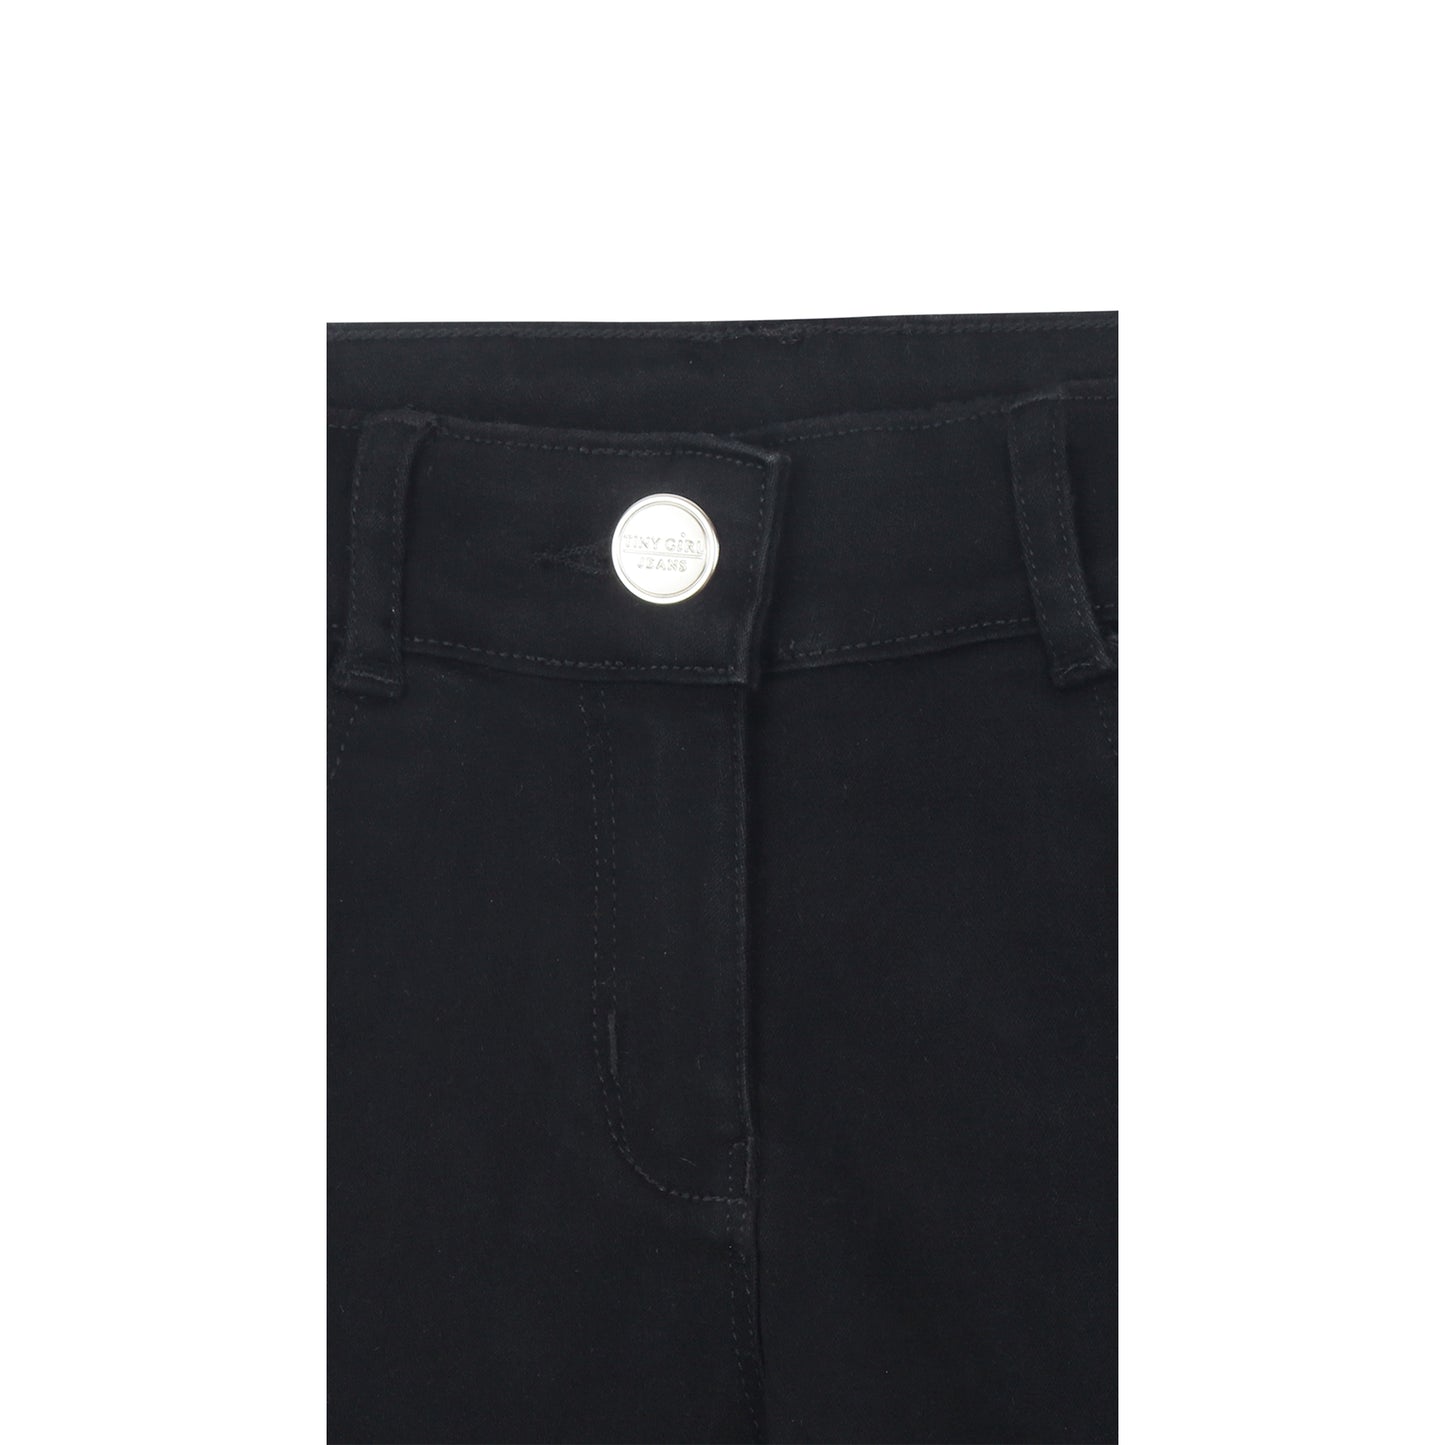 Basic Black Shorts With Girl Patch In Back Pocket